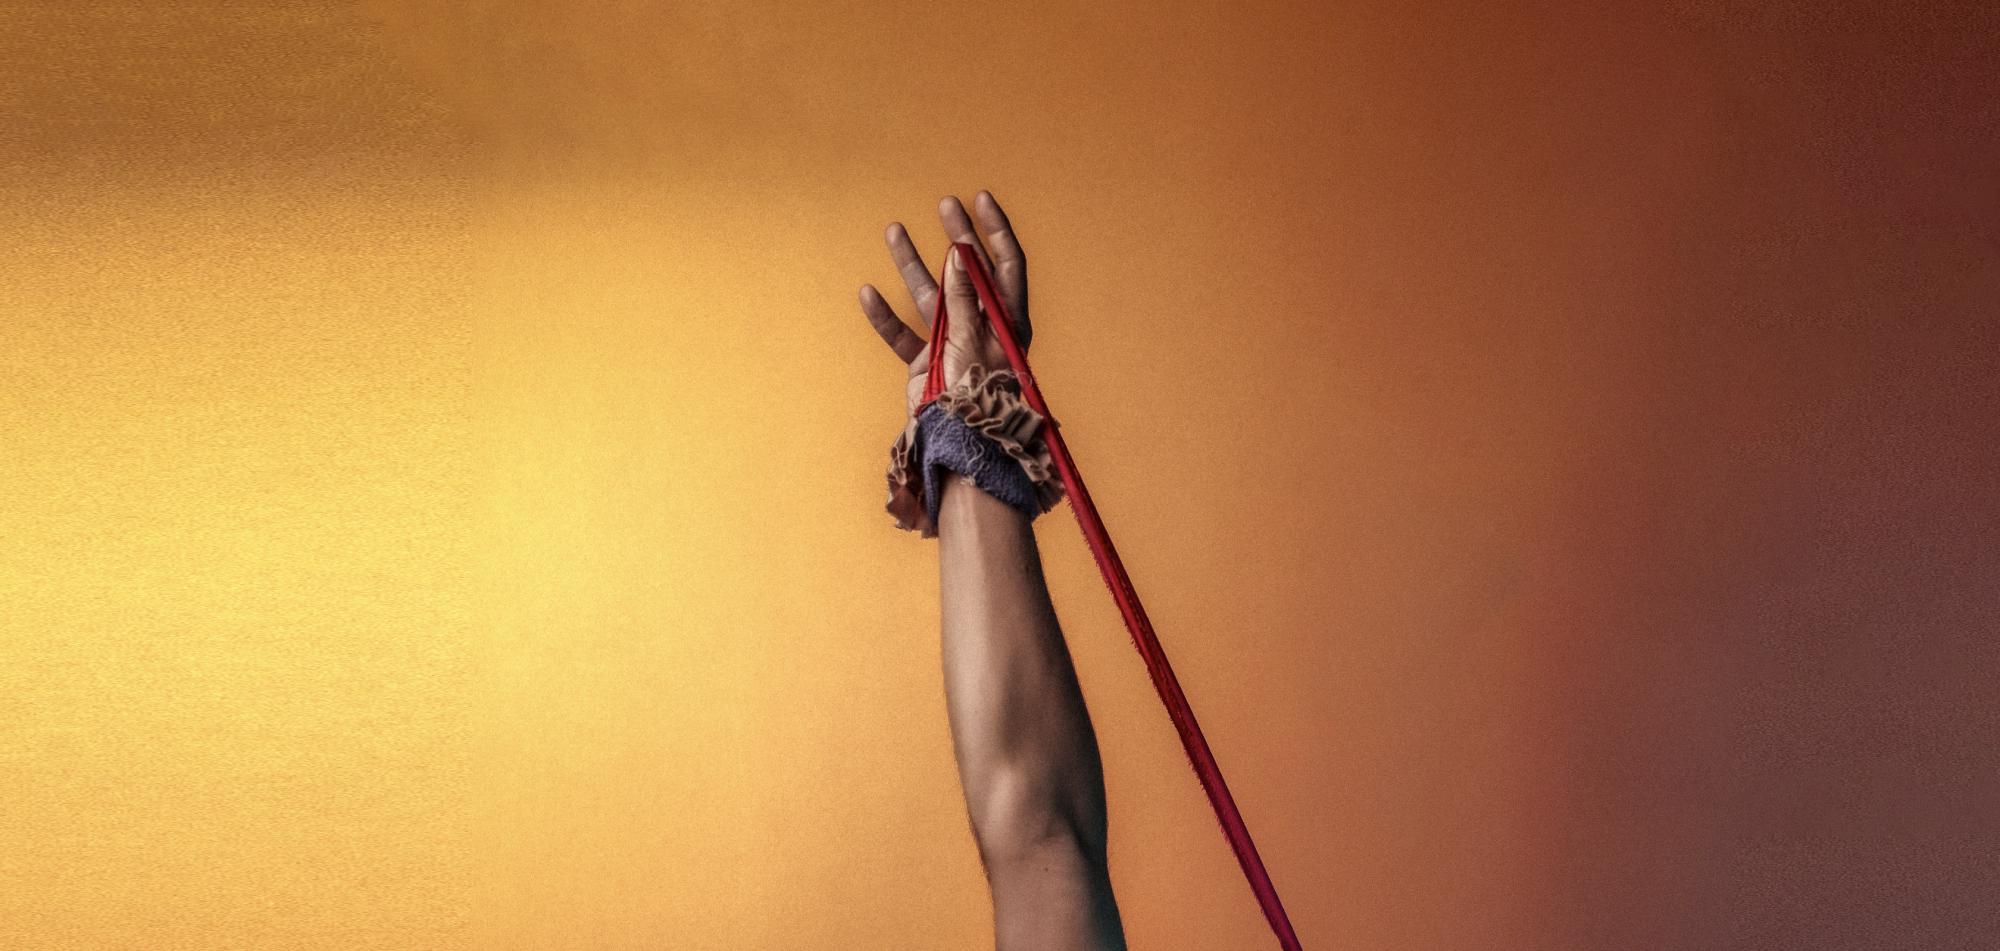 hand reaching up in a fist with string attached to a bracelet against an orange background